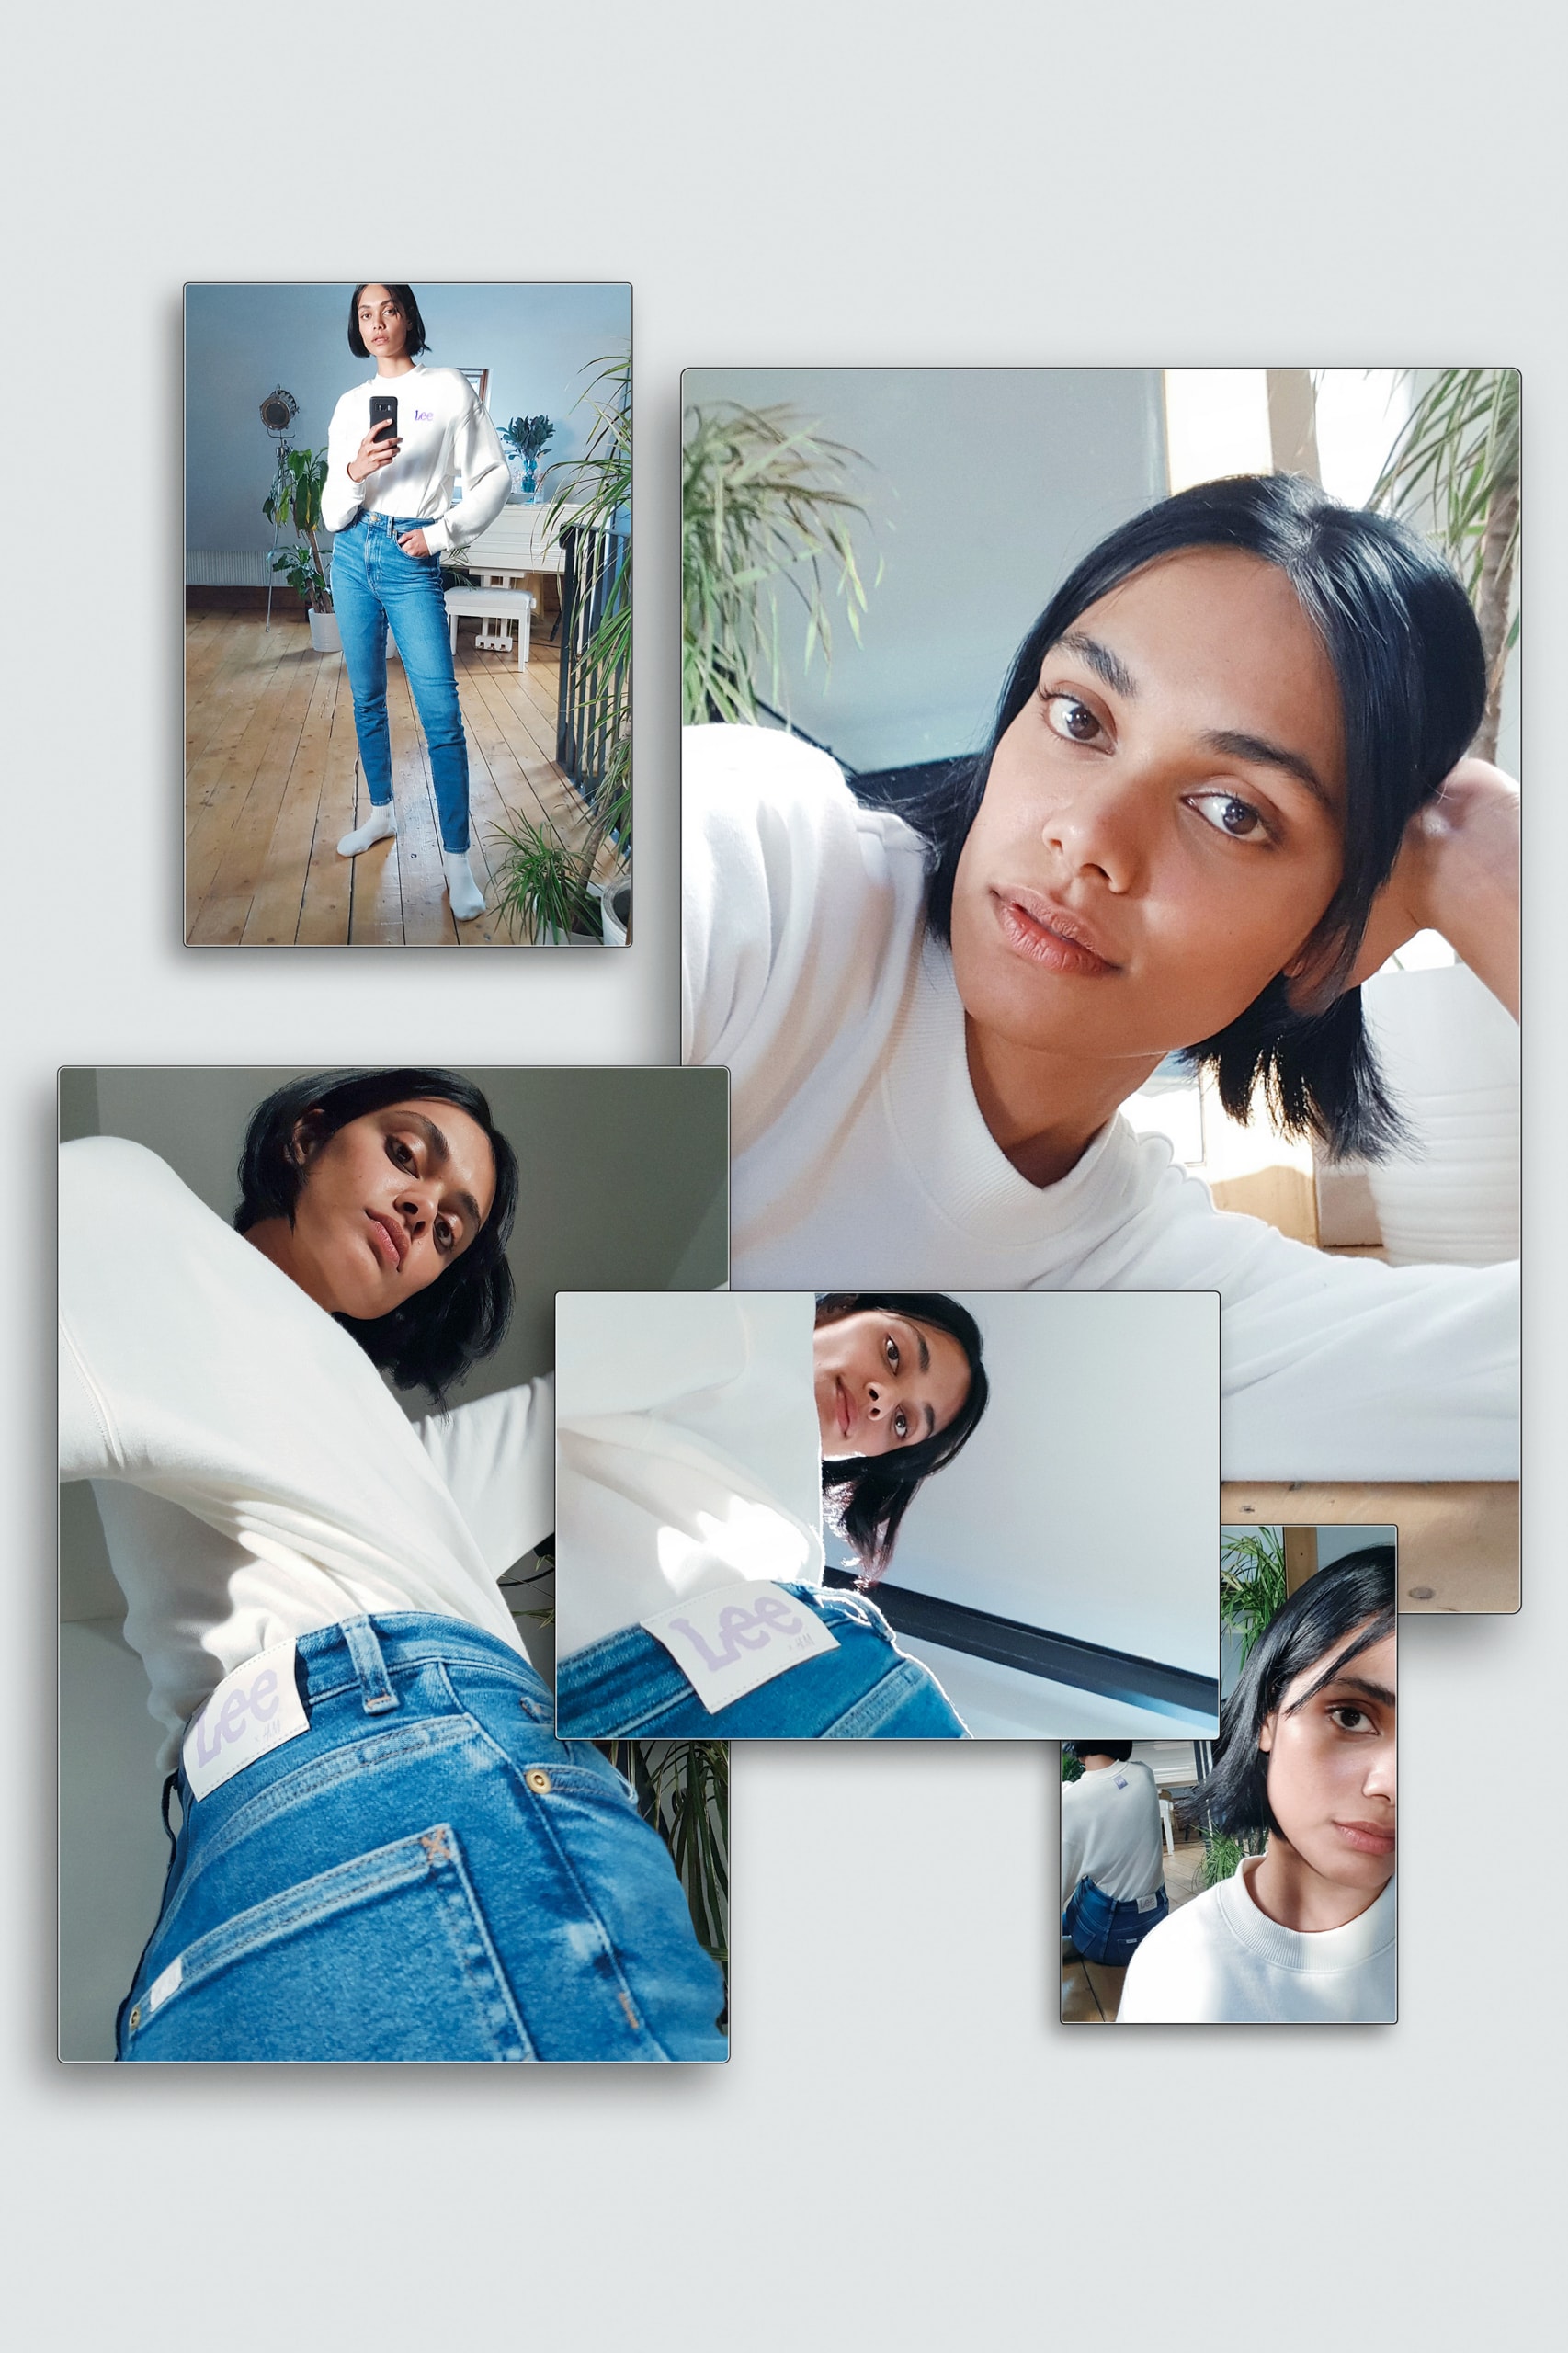 Lee x H&M Sustainable Denim Capsule Collection Fashion Recycled Cotton